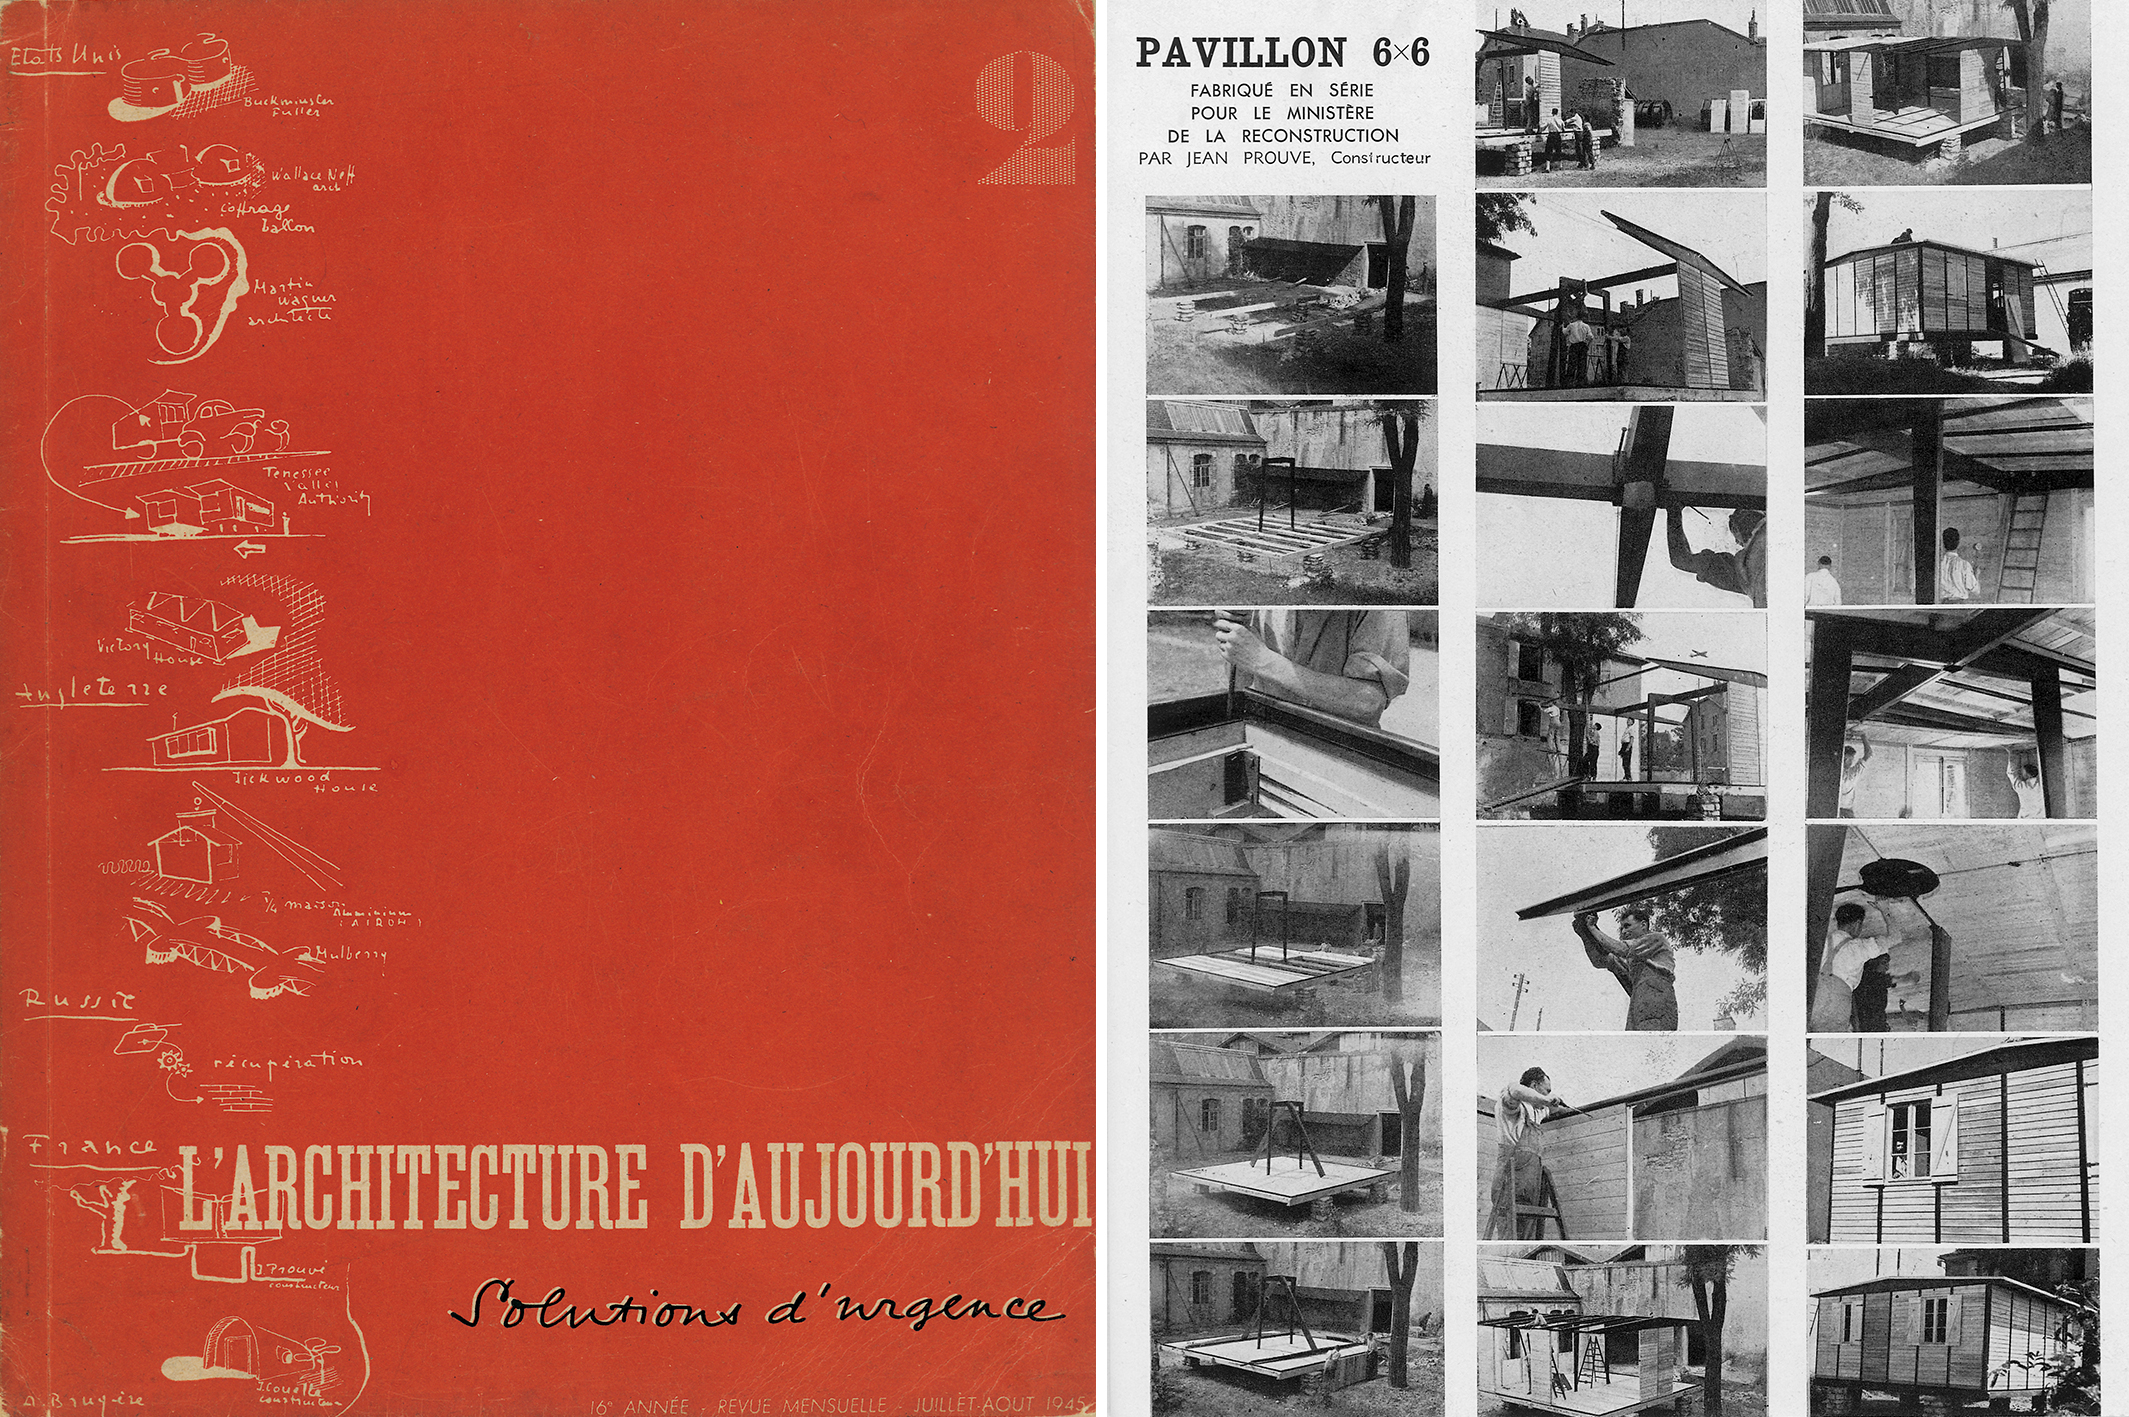 “6x6 pavilion for the Ministry of Reconstruction mass-produced by Jean Prouvé, Manufacturer”. Emergency Solutions, <i>L’Architecture d’aujourd’hui</i>, no. 2, July–August 1945.